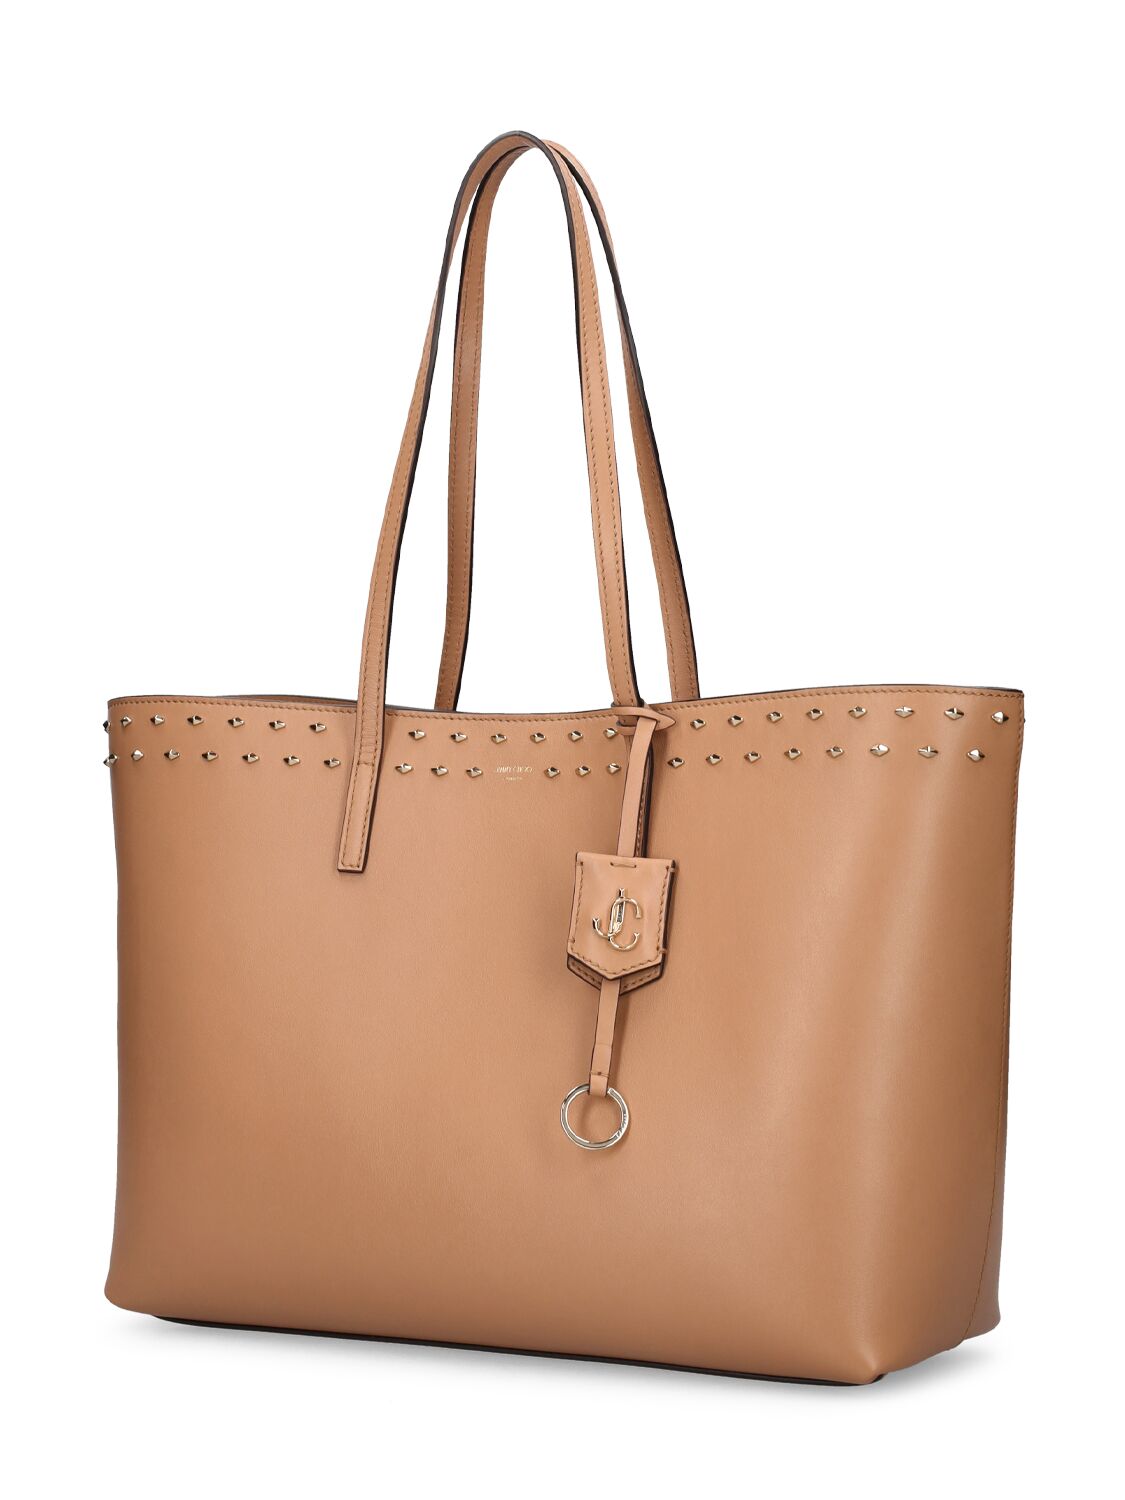 Shop Jimmy Choo Nine 2 Five Smooth Leather Tote Bag In Biscuit,gold